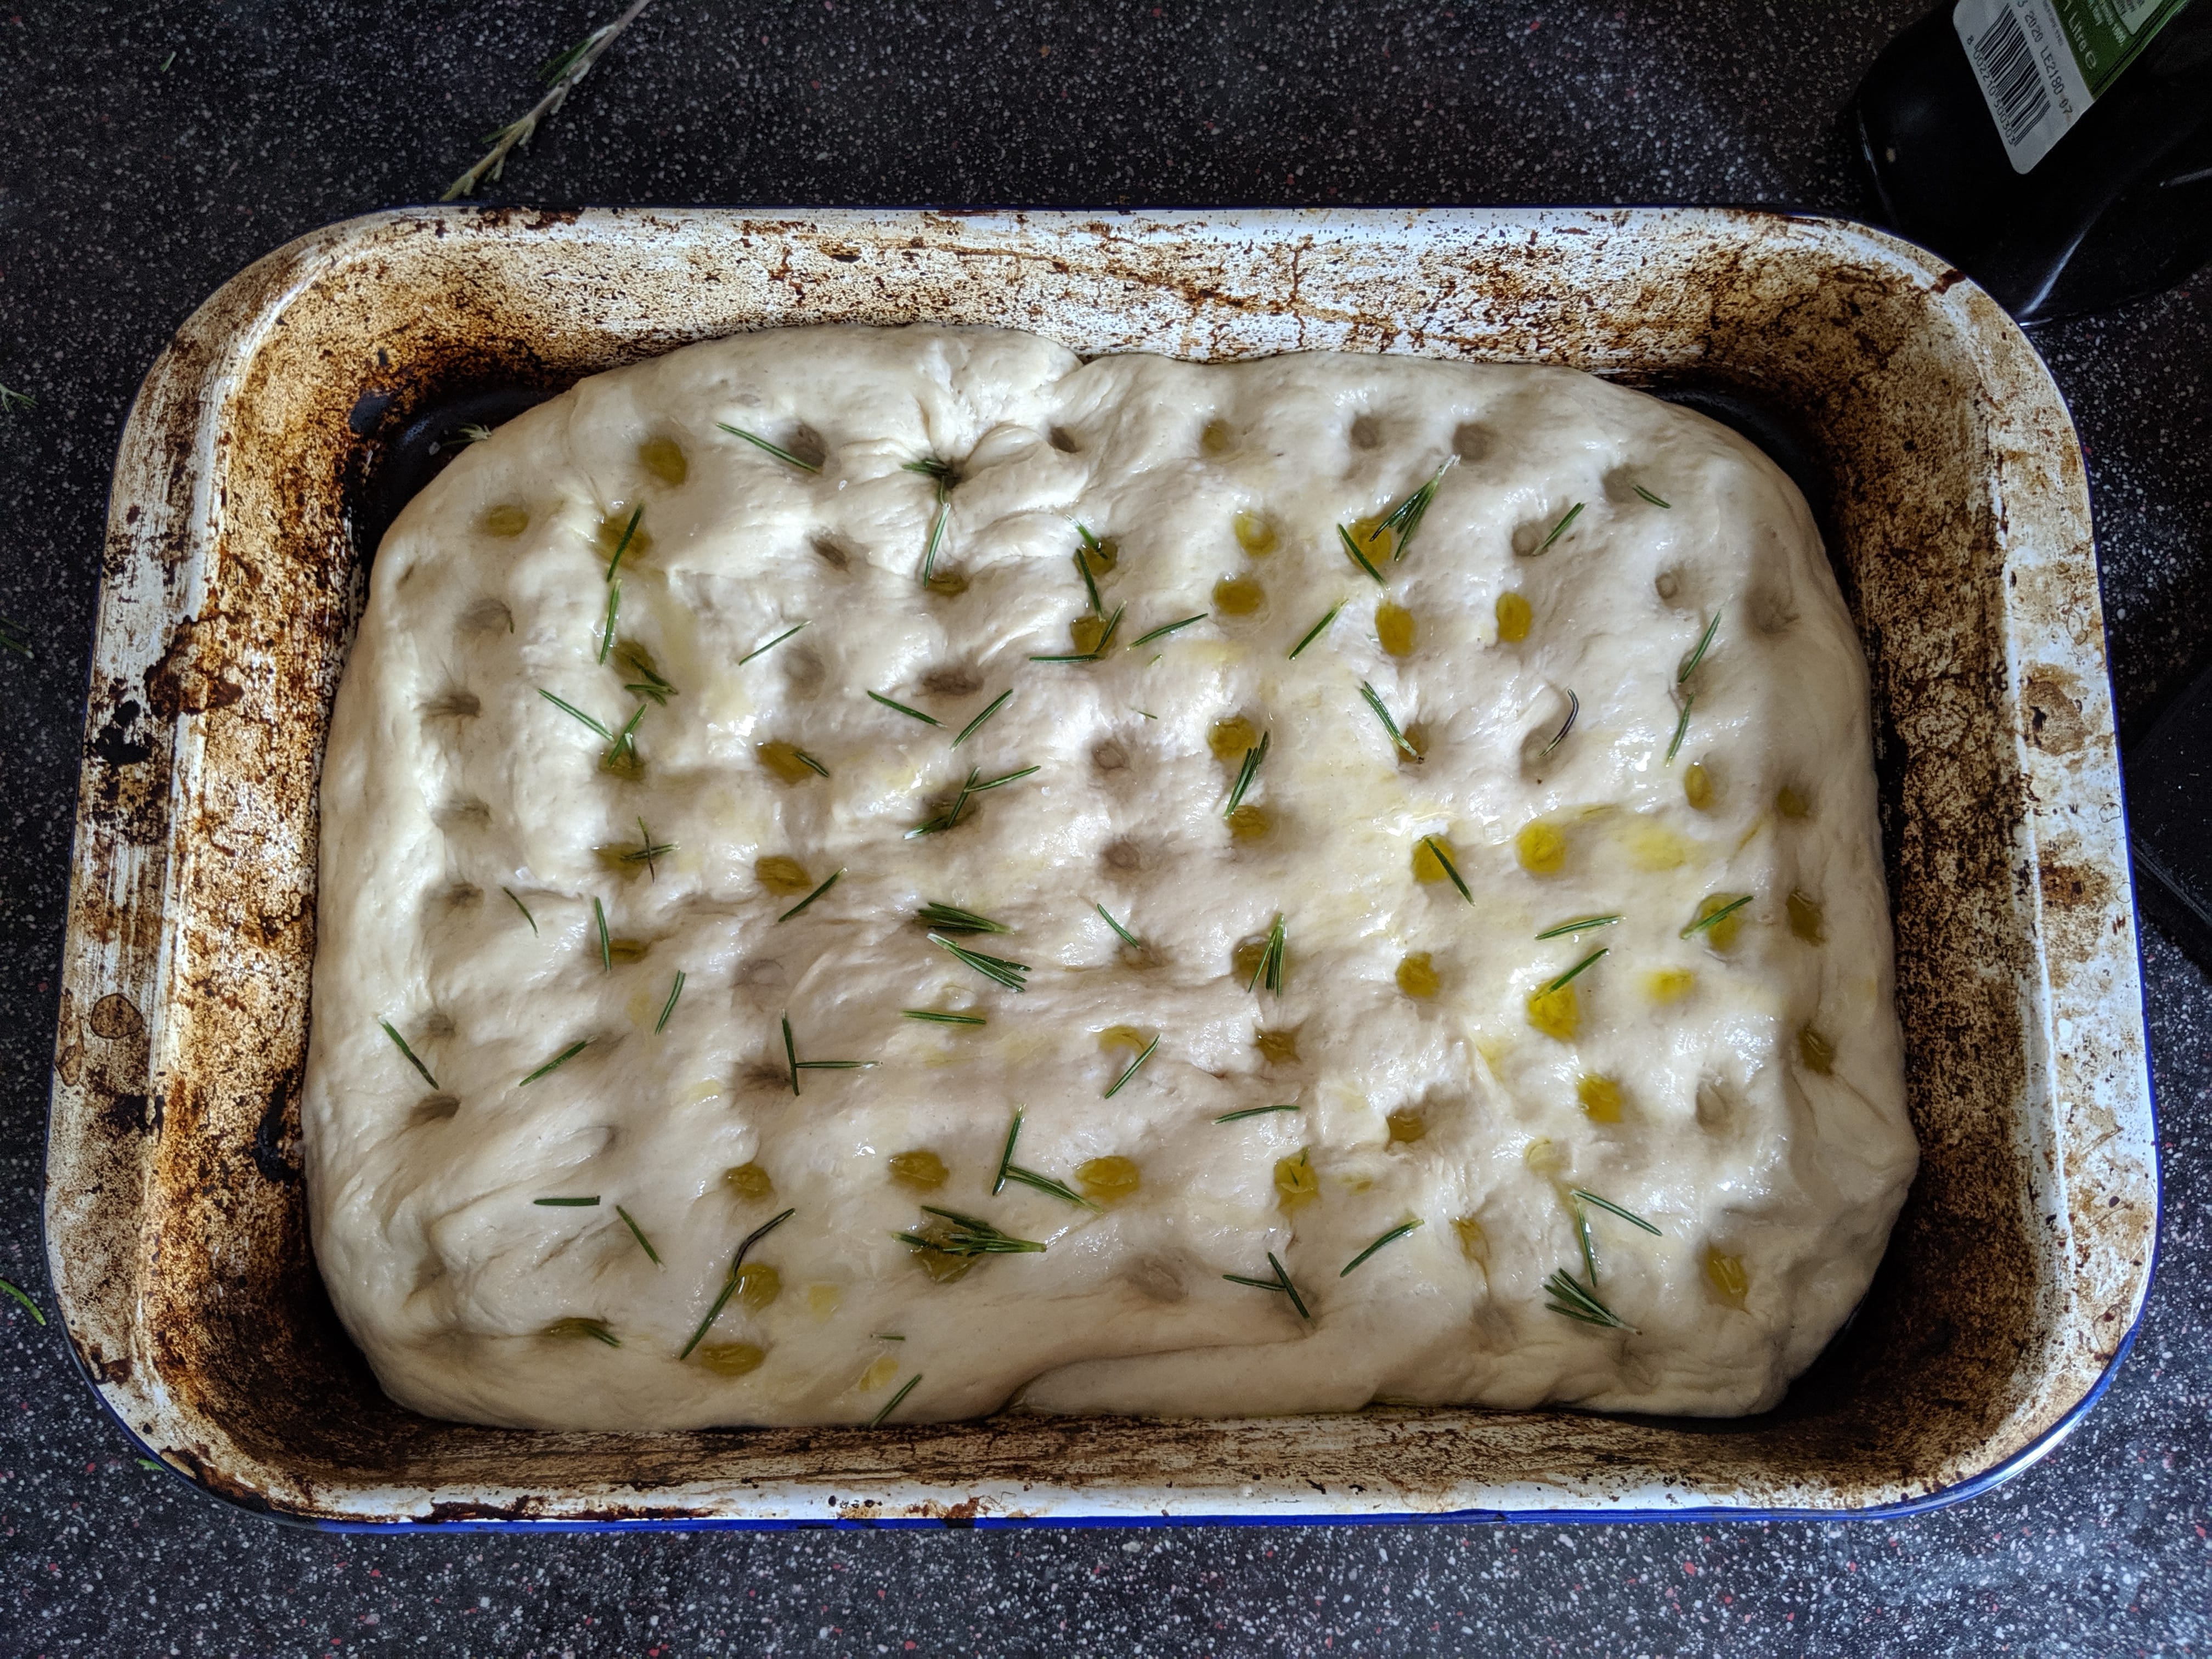 The focaccia dough, covered in rosemary and salt (before the oven)